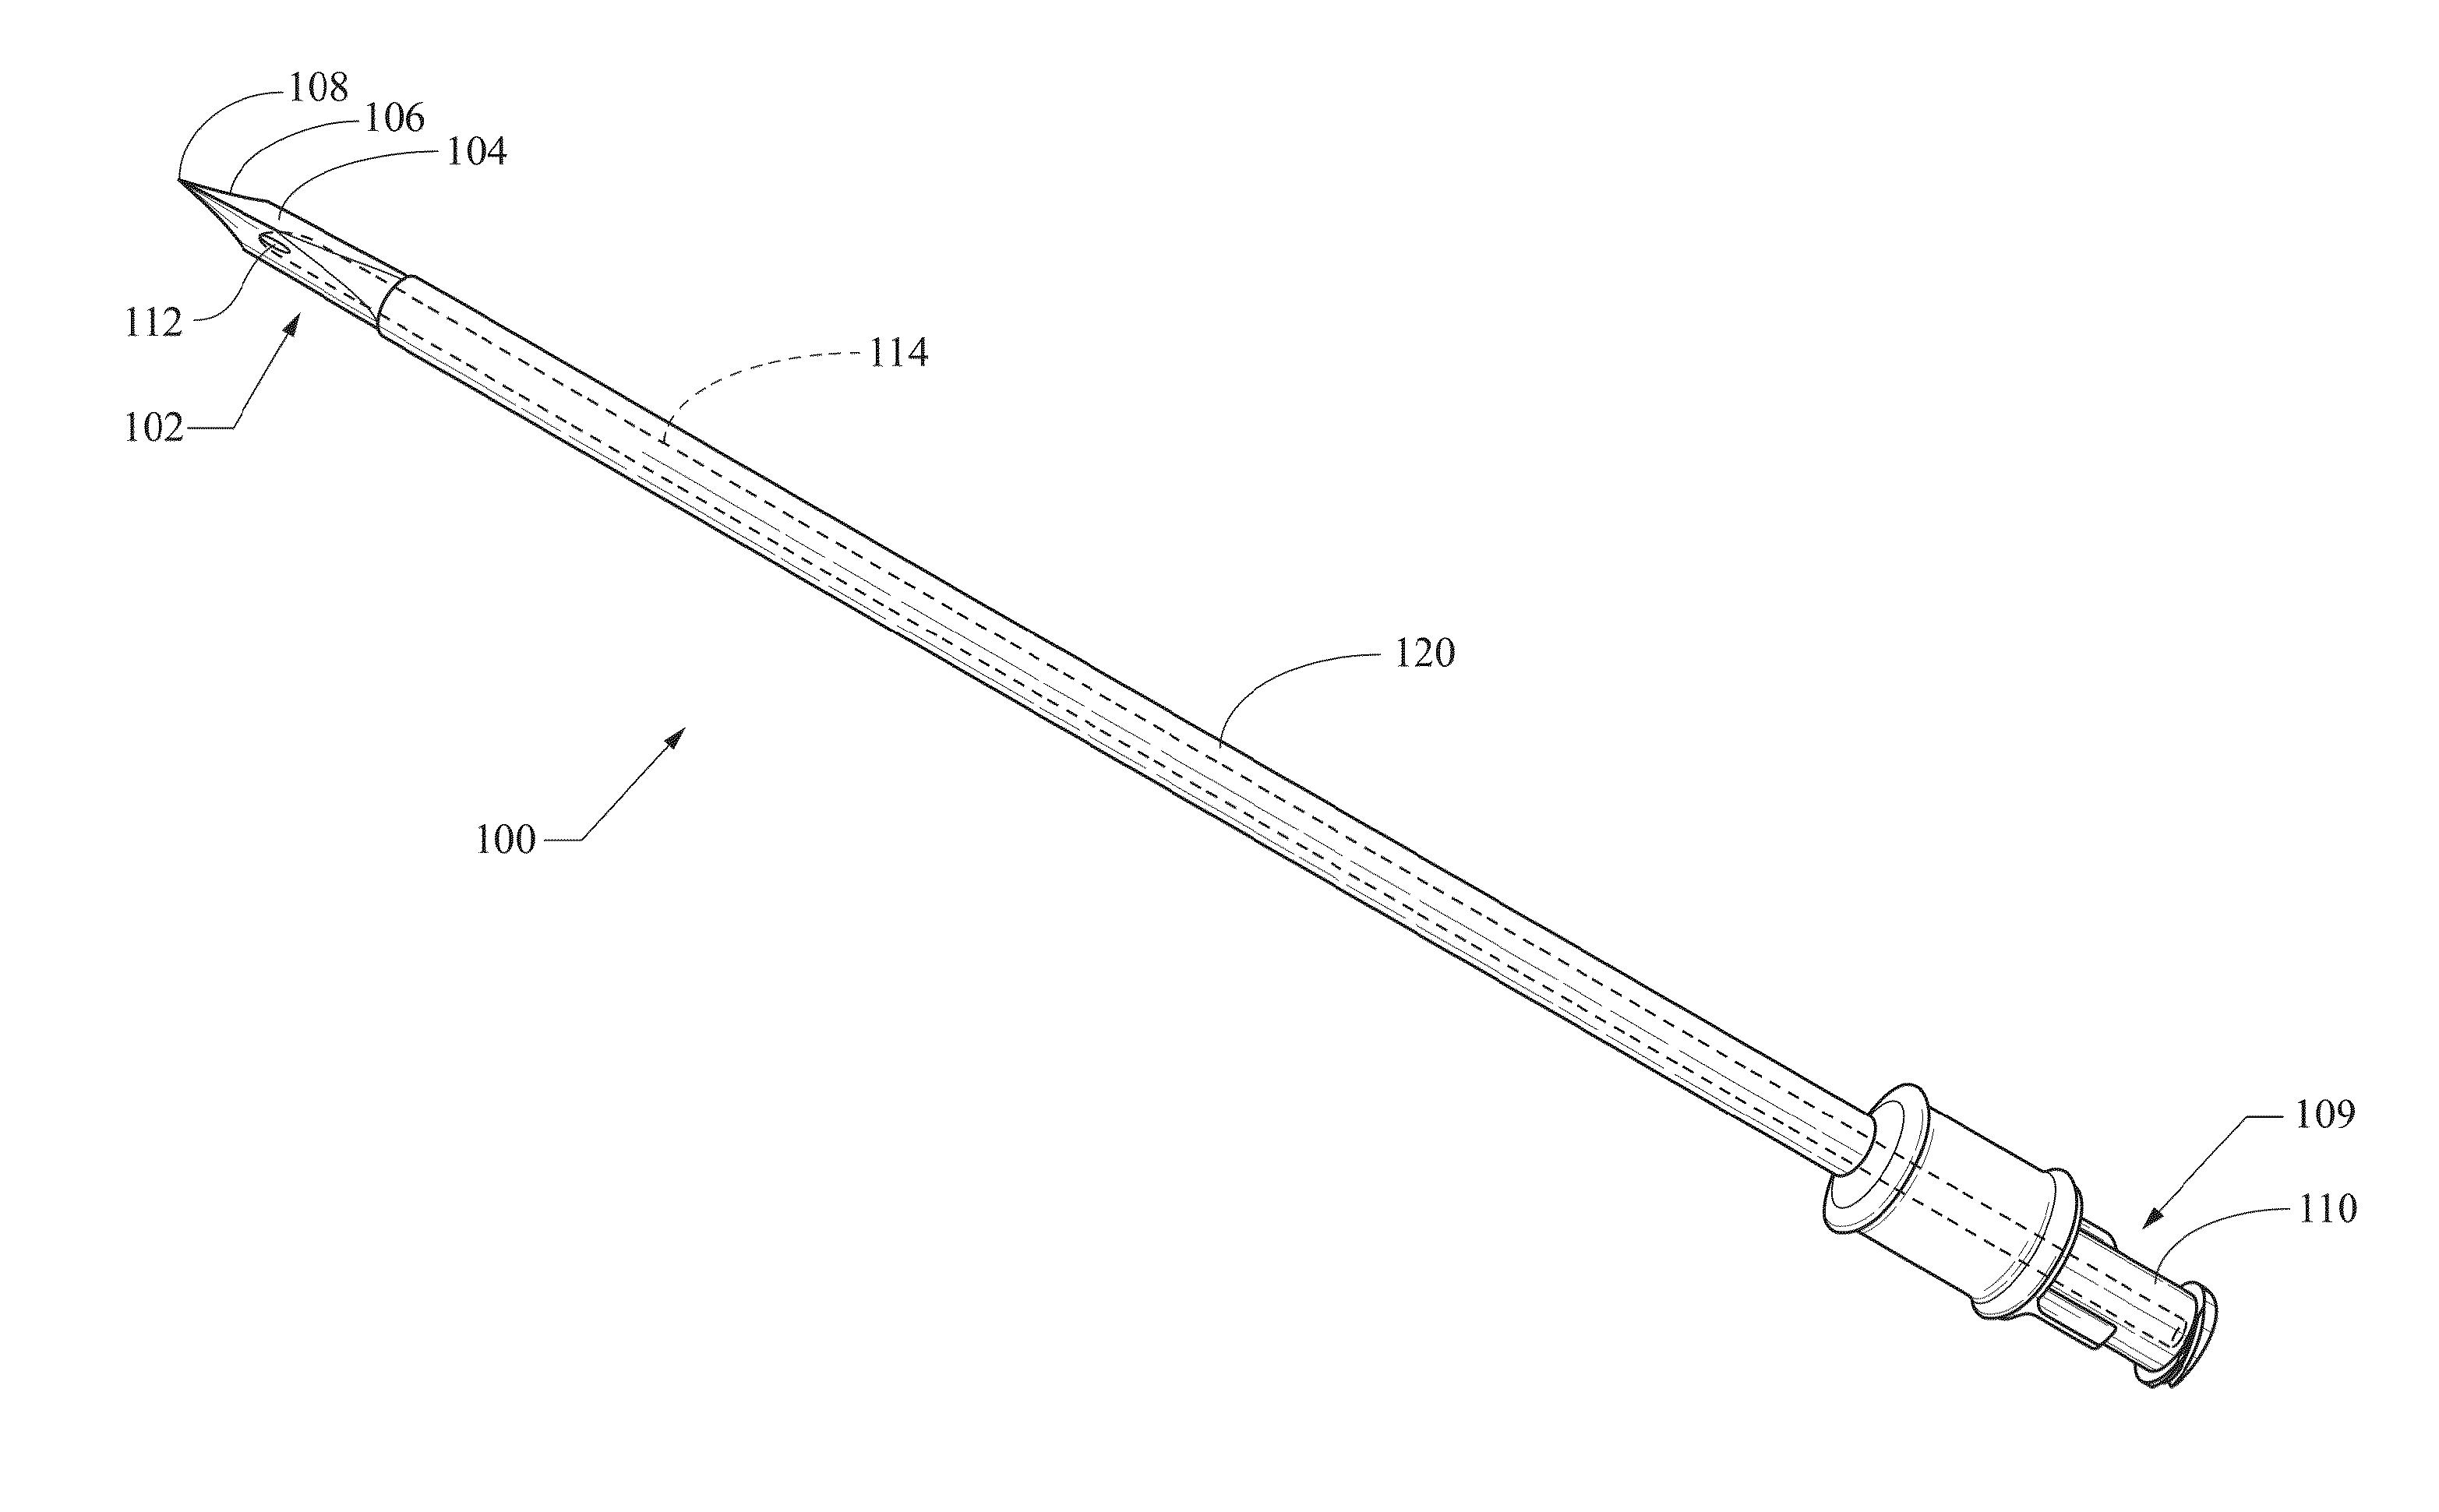 Tri-fluted vascular access needle